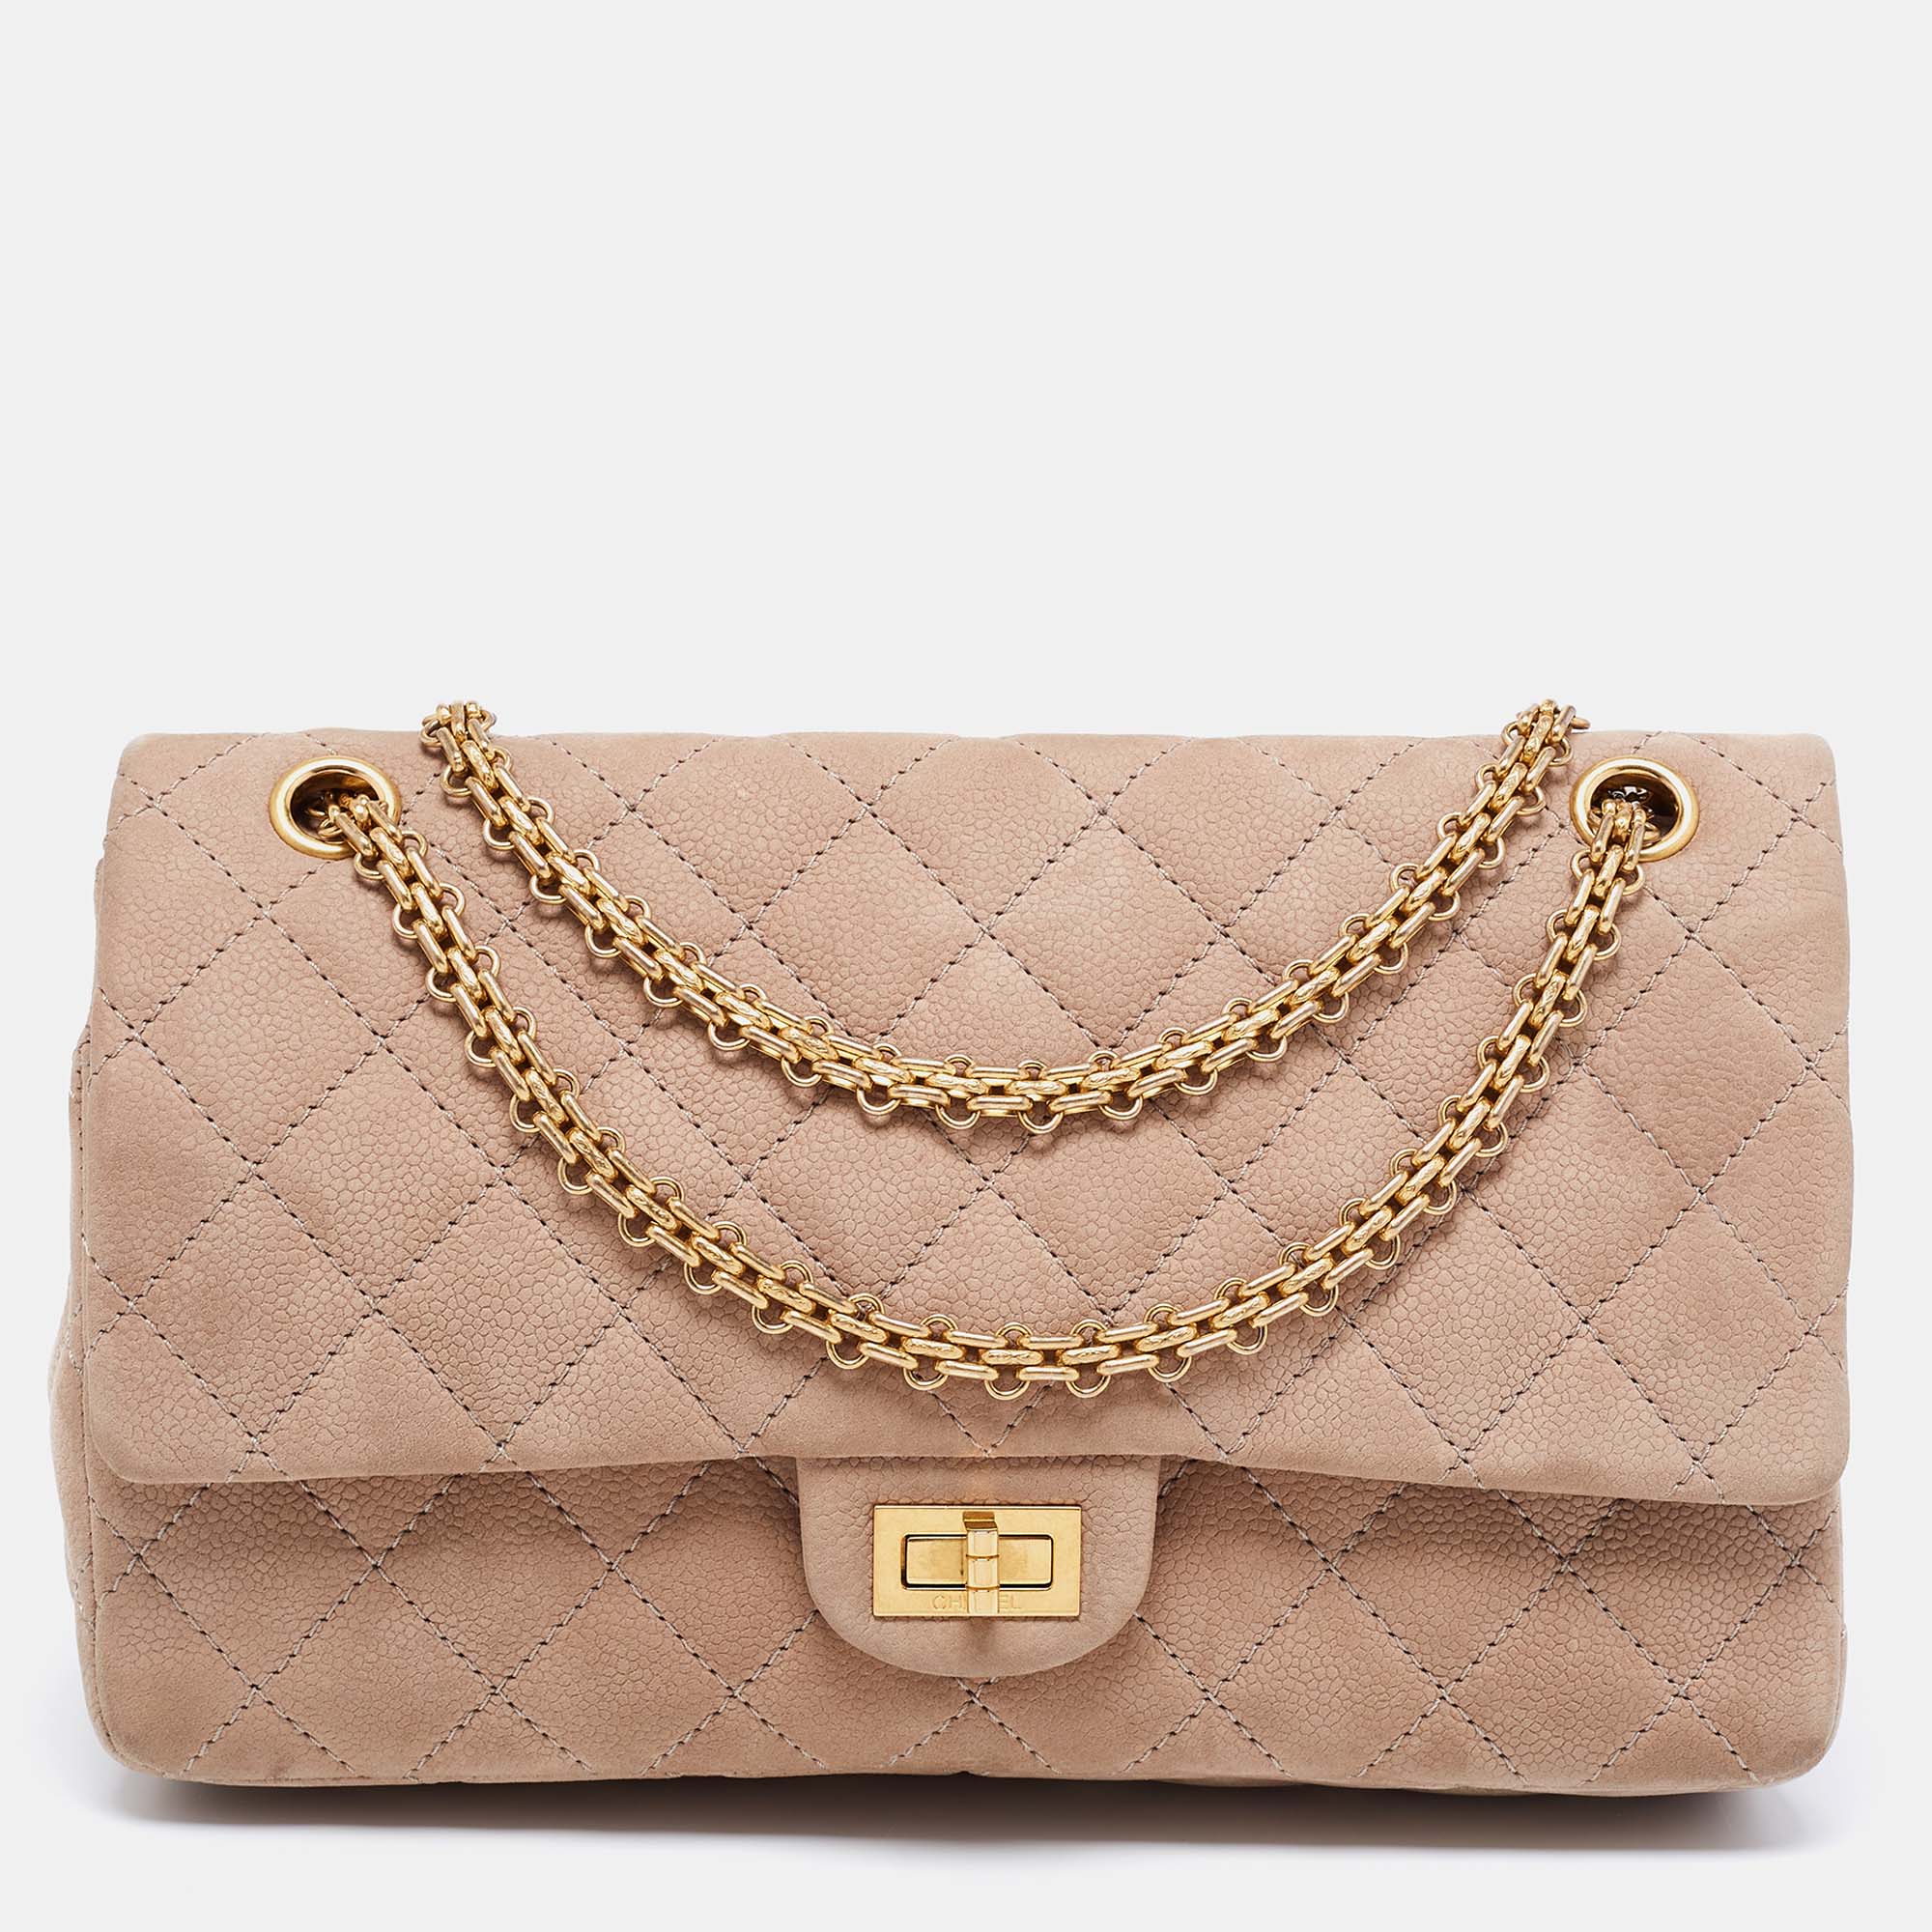 CHANEL Distressed Patent Quilted 2.55 Reissue 226 Flap Beige